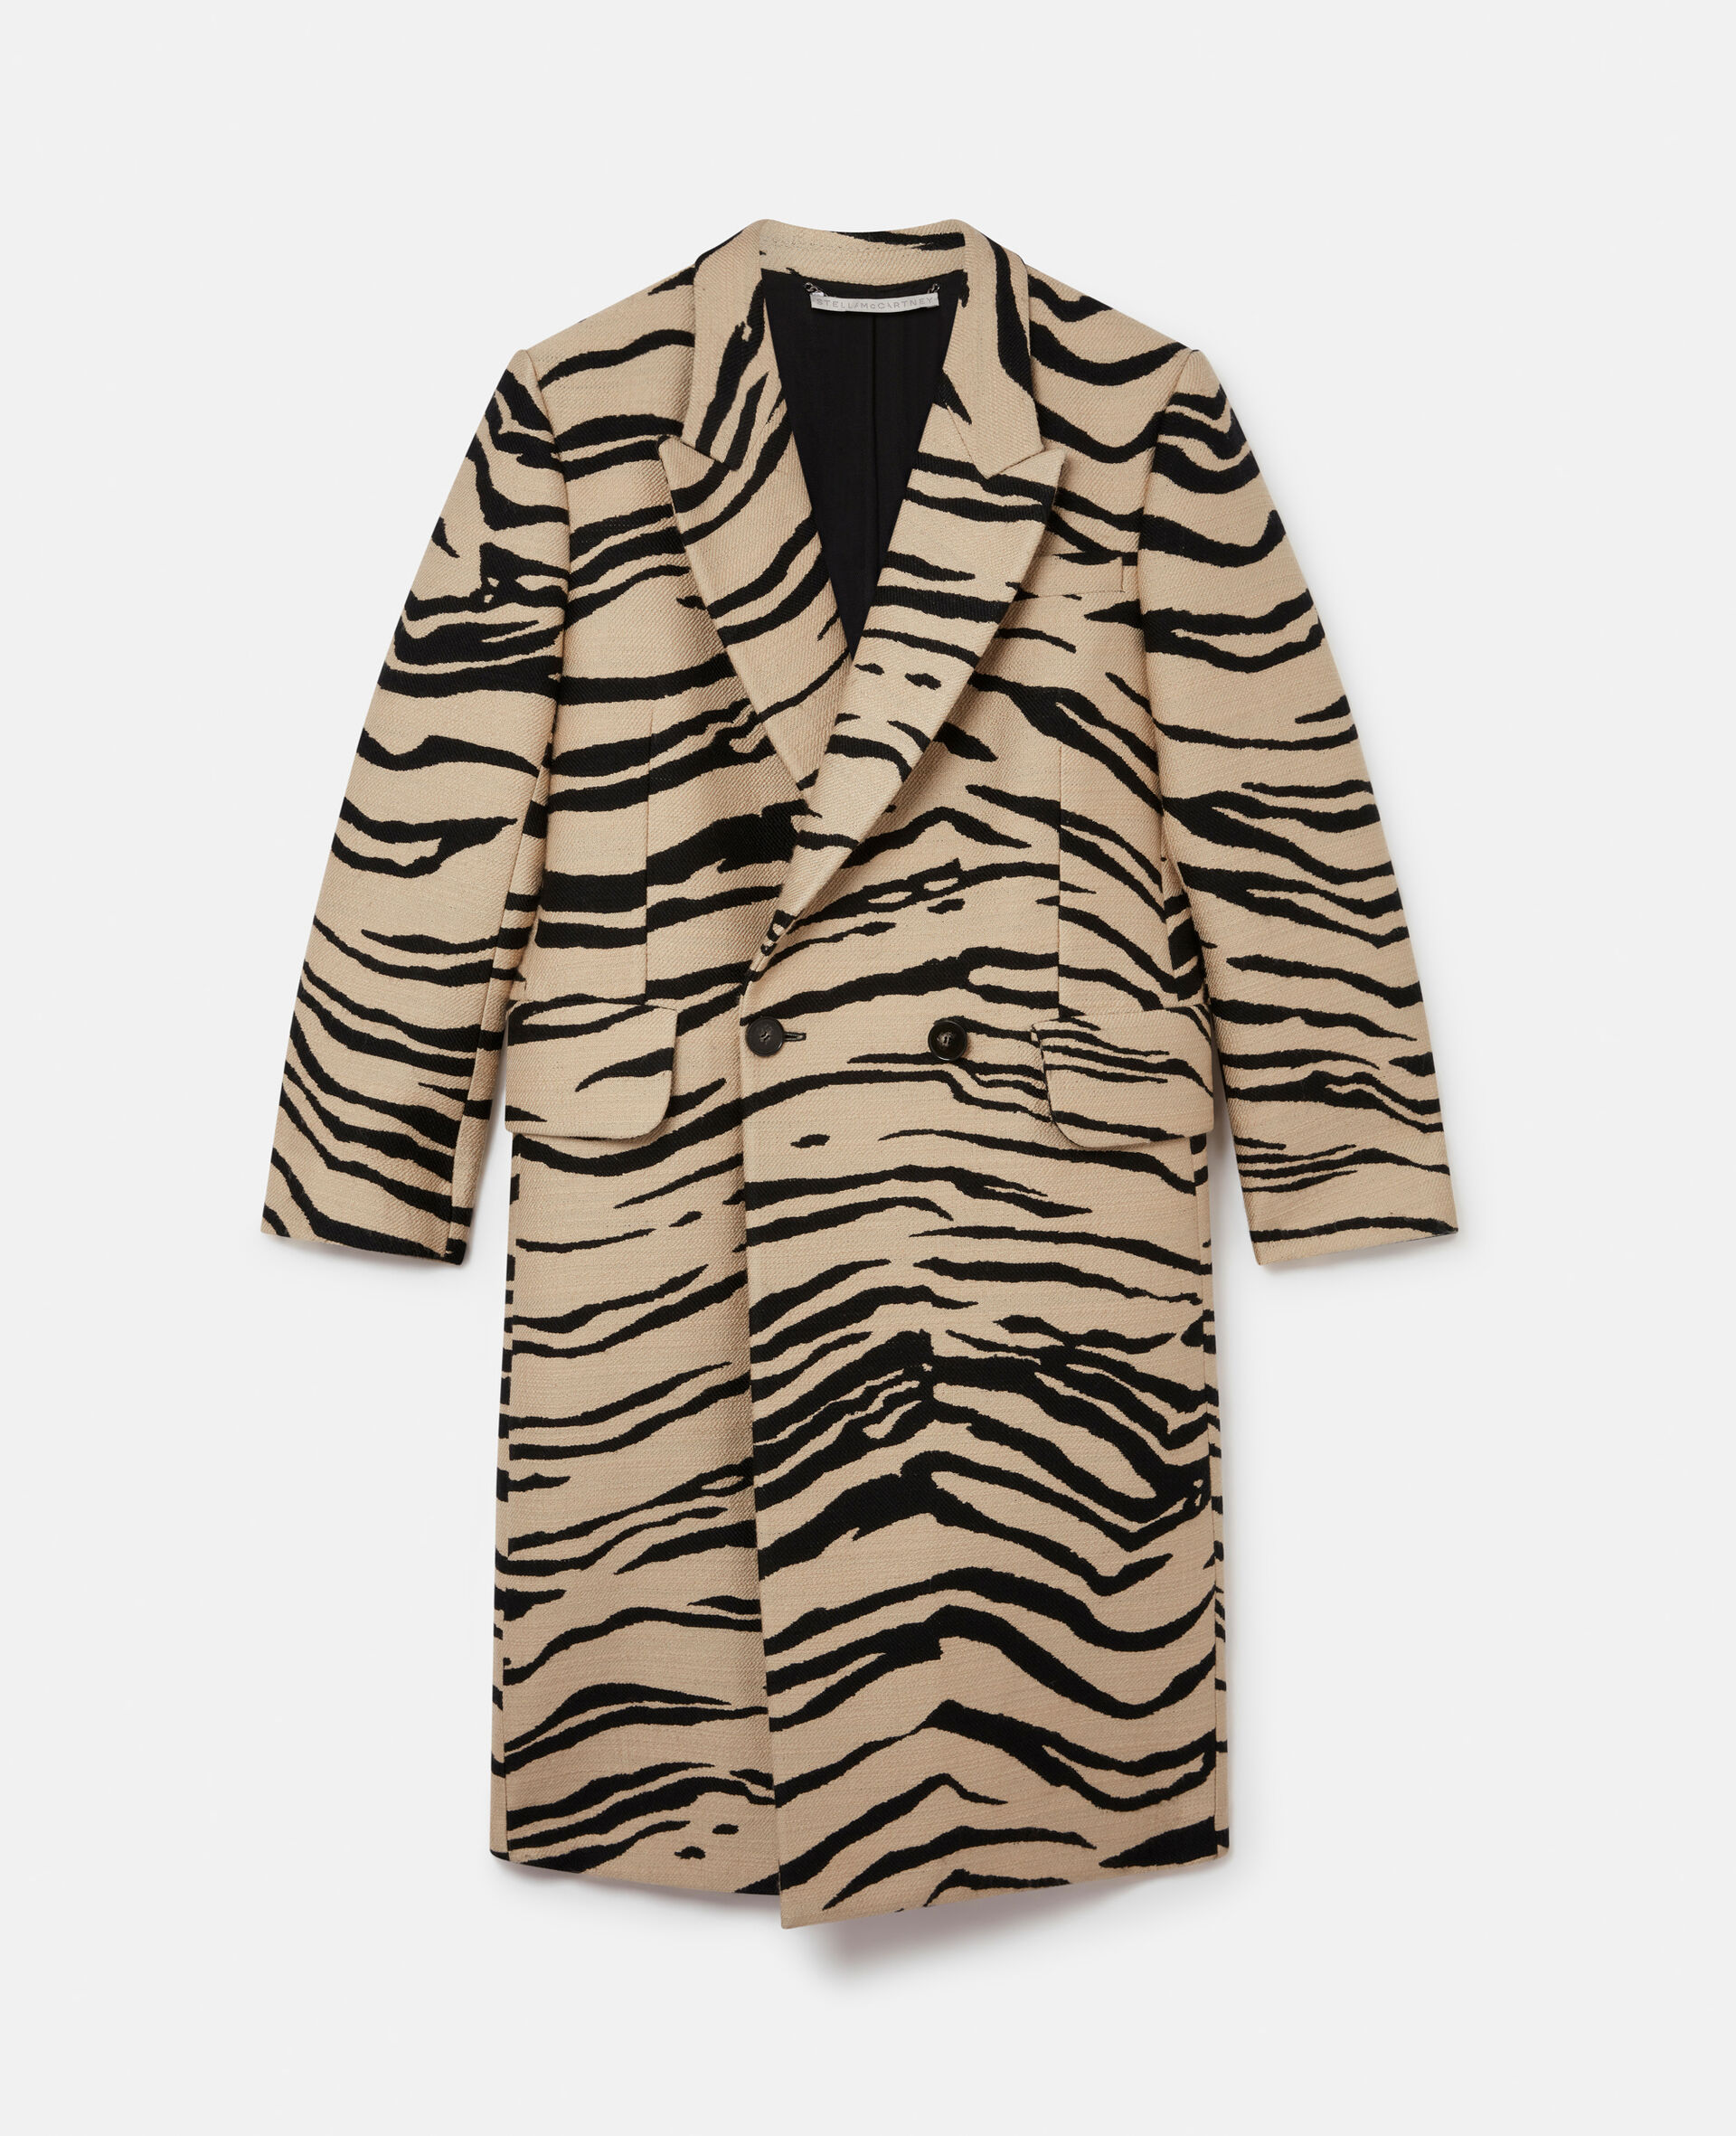 Tiger Print Double-Breasted Coat-Beige-large